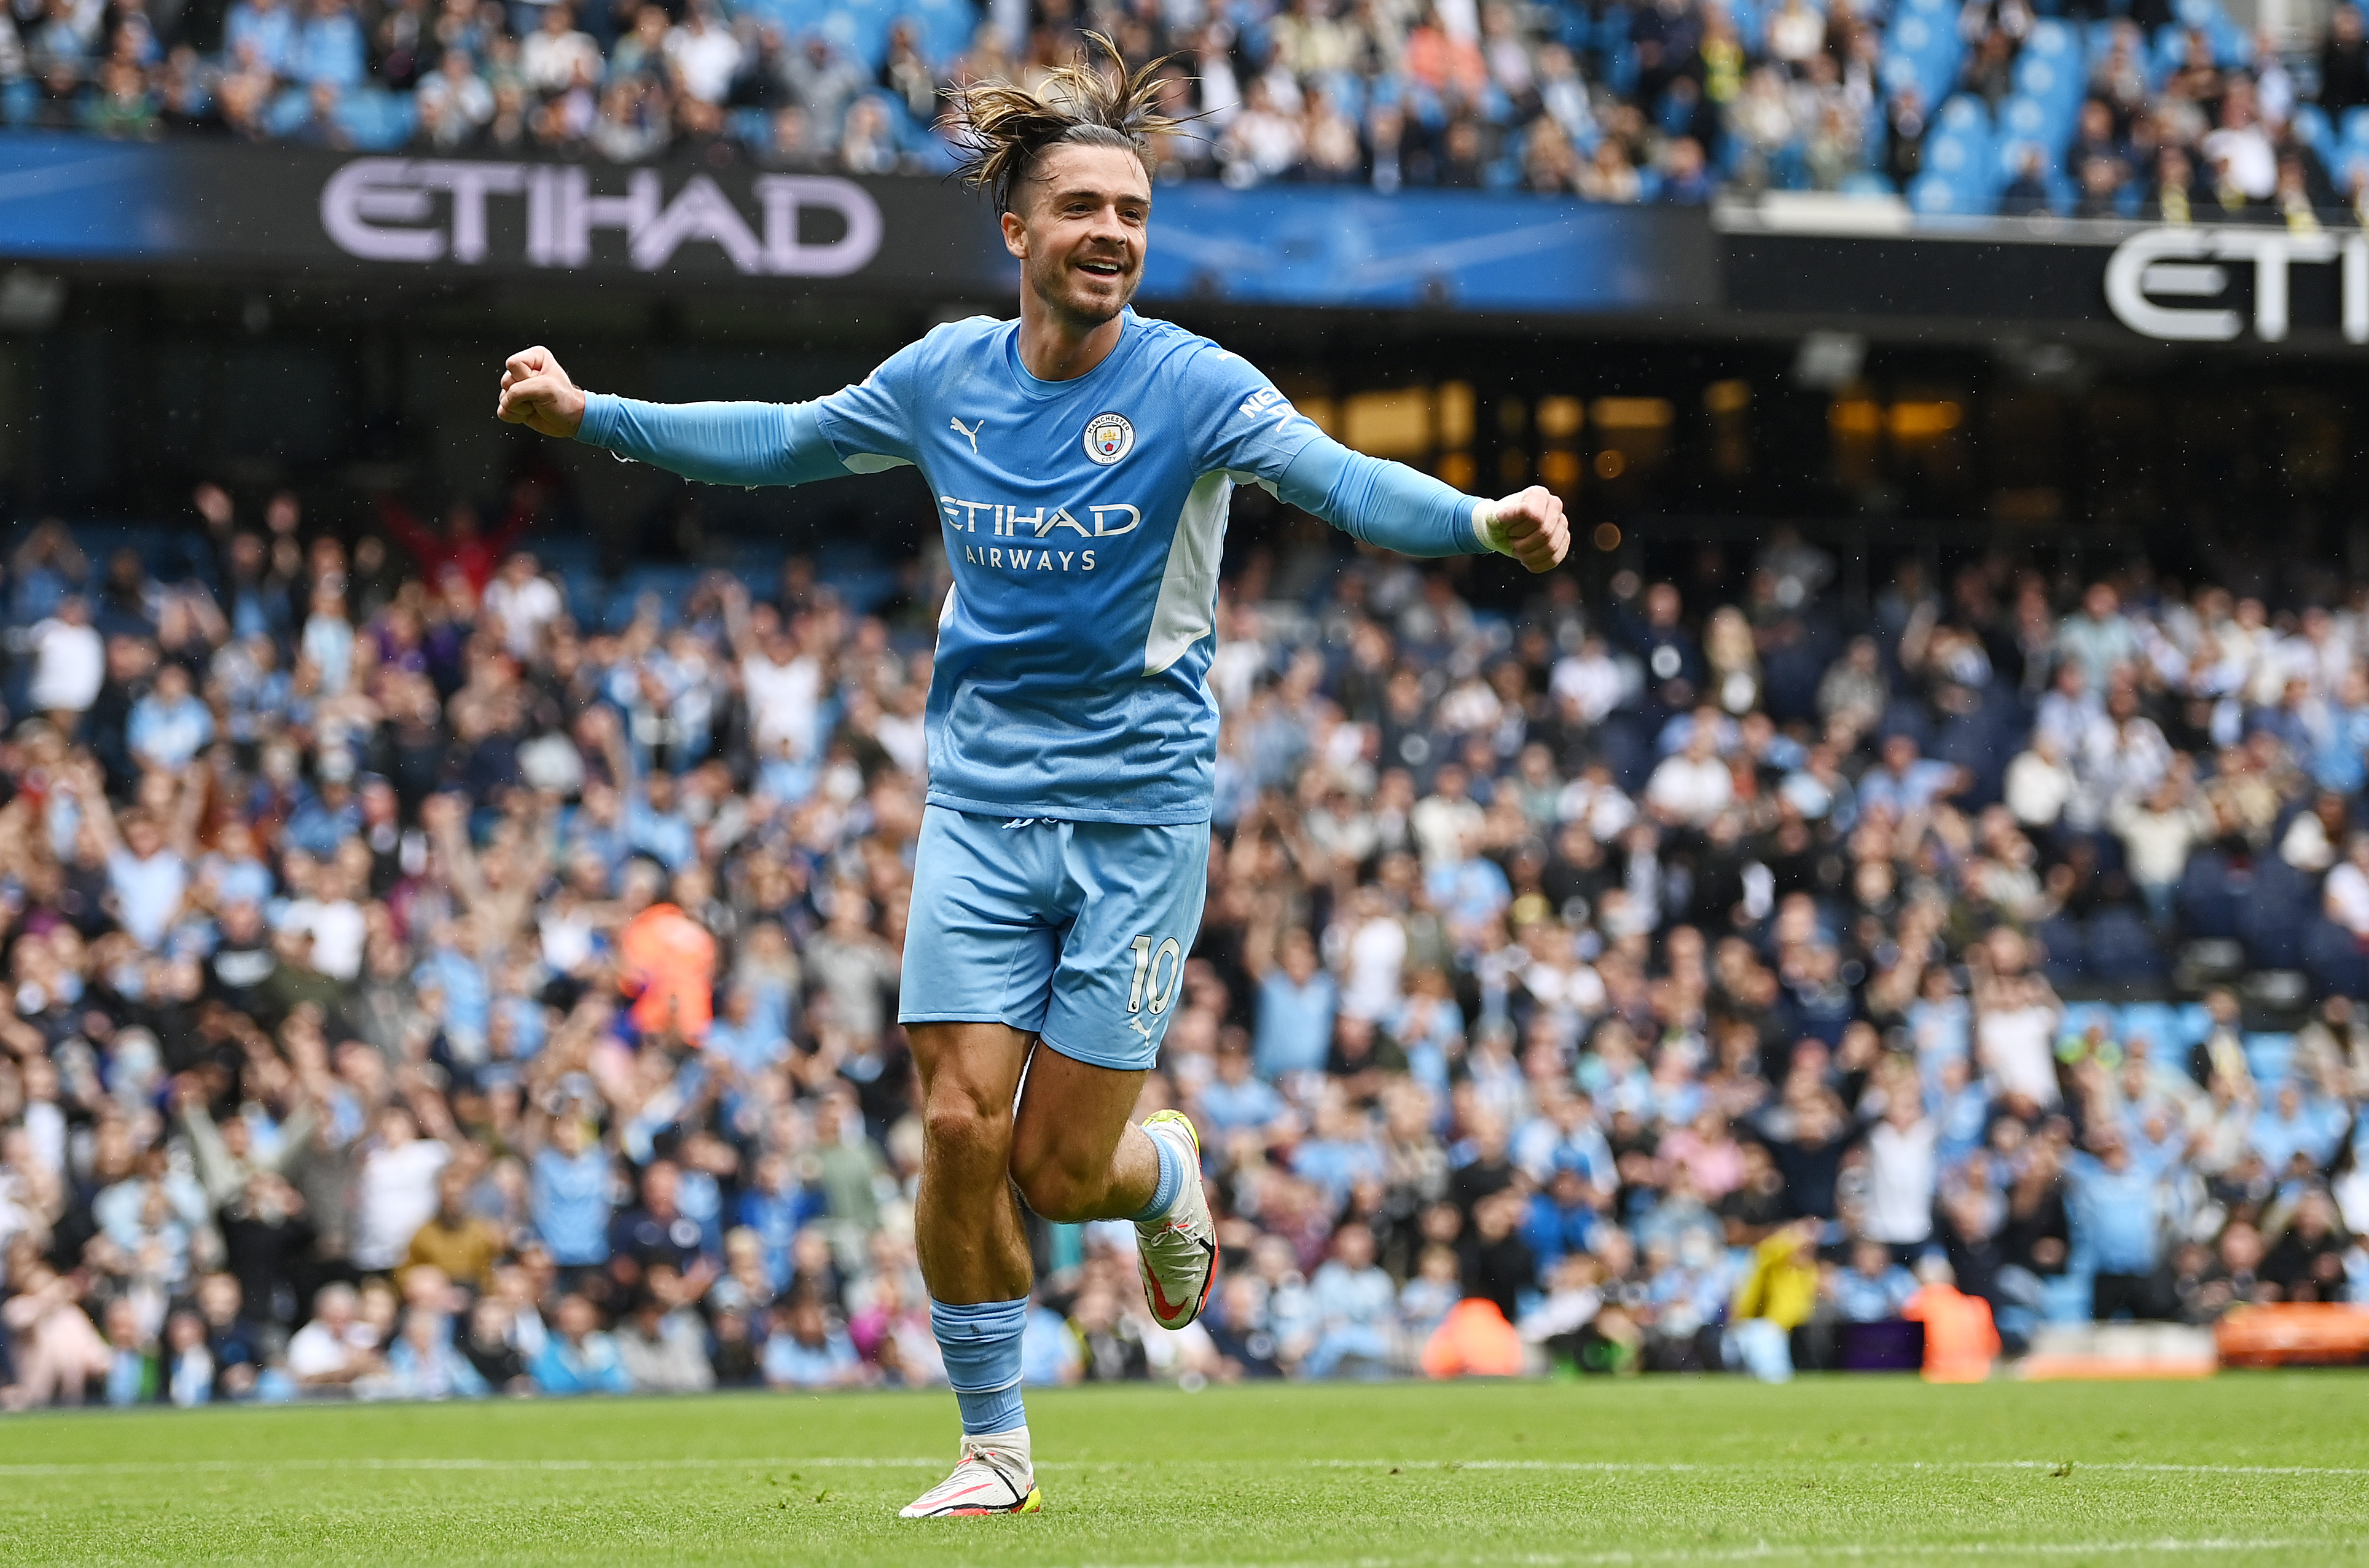 Jack Grealish of Manchester City celebrates a goal in the Premier League